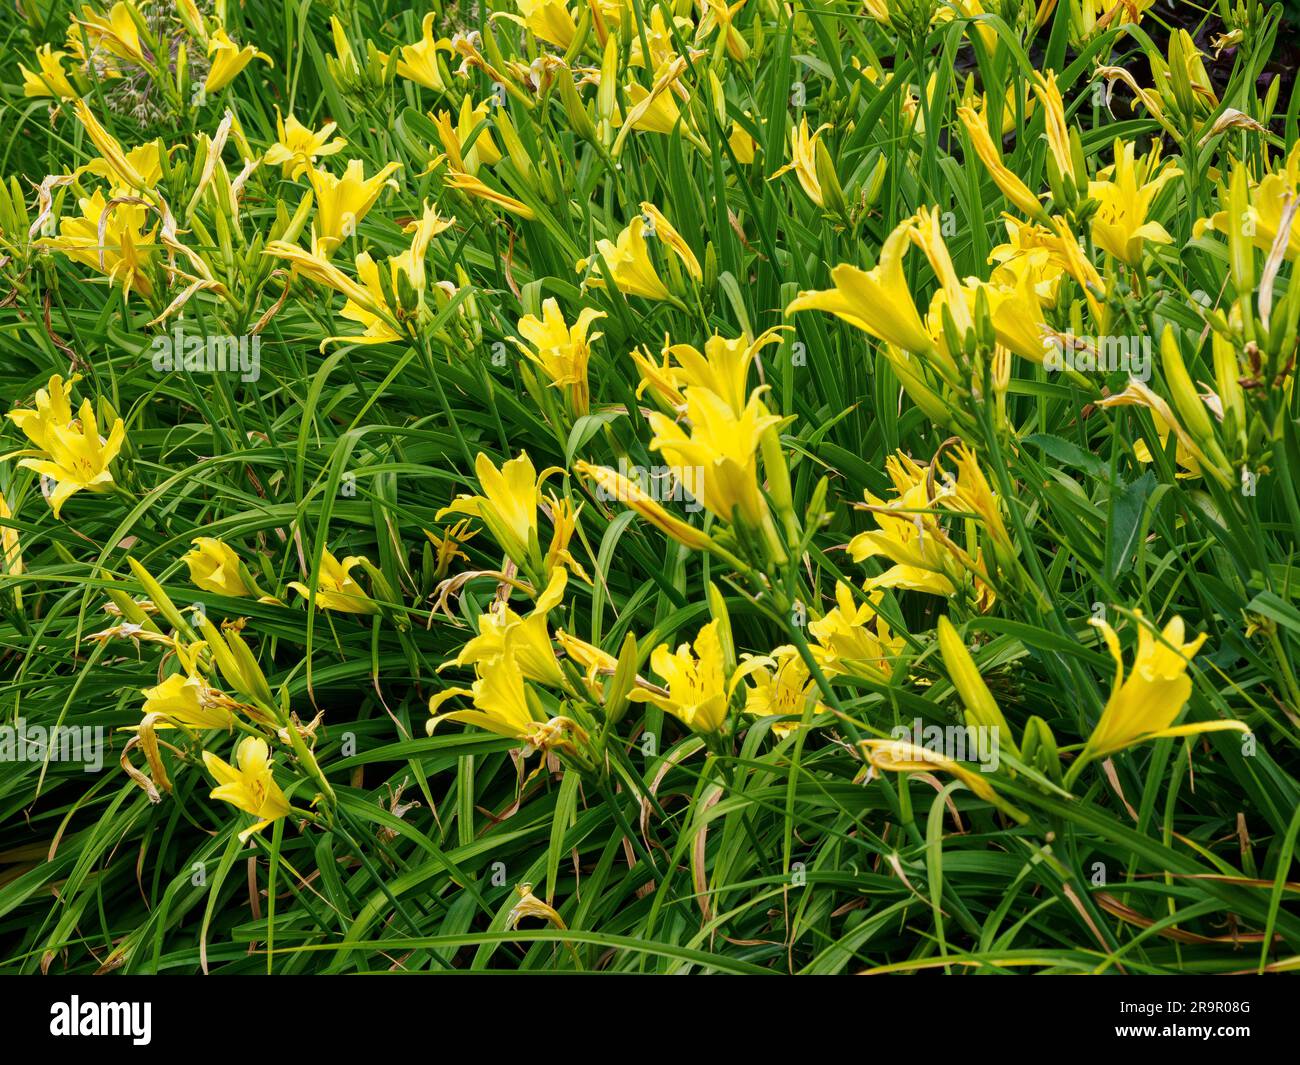 Lemon Lily Hemerocallis lilioasphodelus a Day Lily brightening a midsummer herbaceous border in South Wales UK Stock Photo